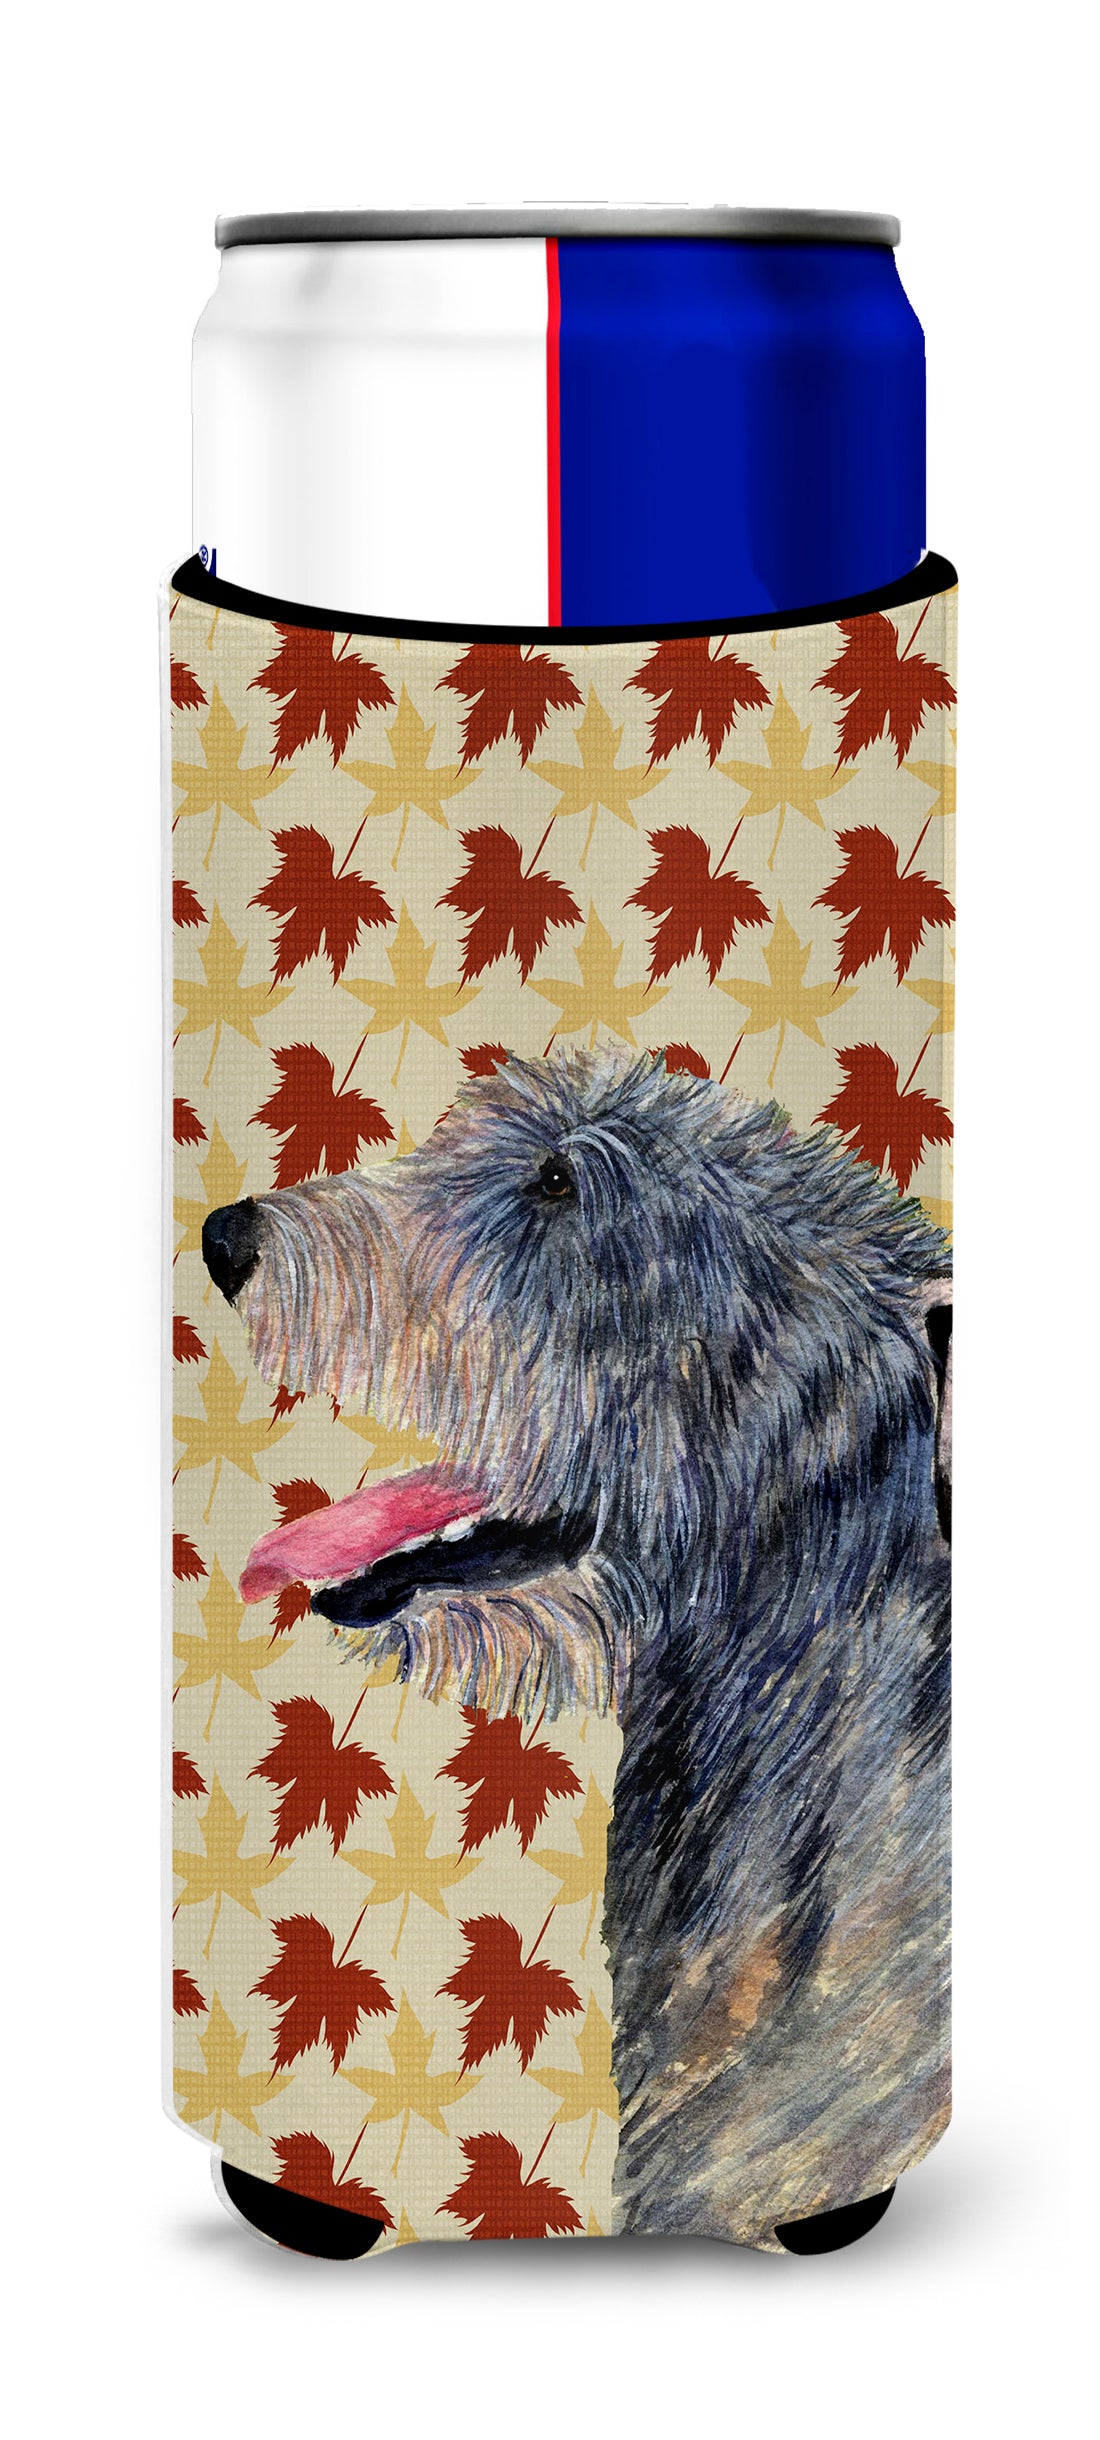 Irish Wolfhound Fall Leaves Portrait Ultra Beverage Insulators for slim cans SS4350MUK.